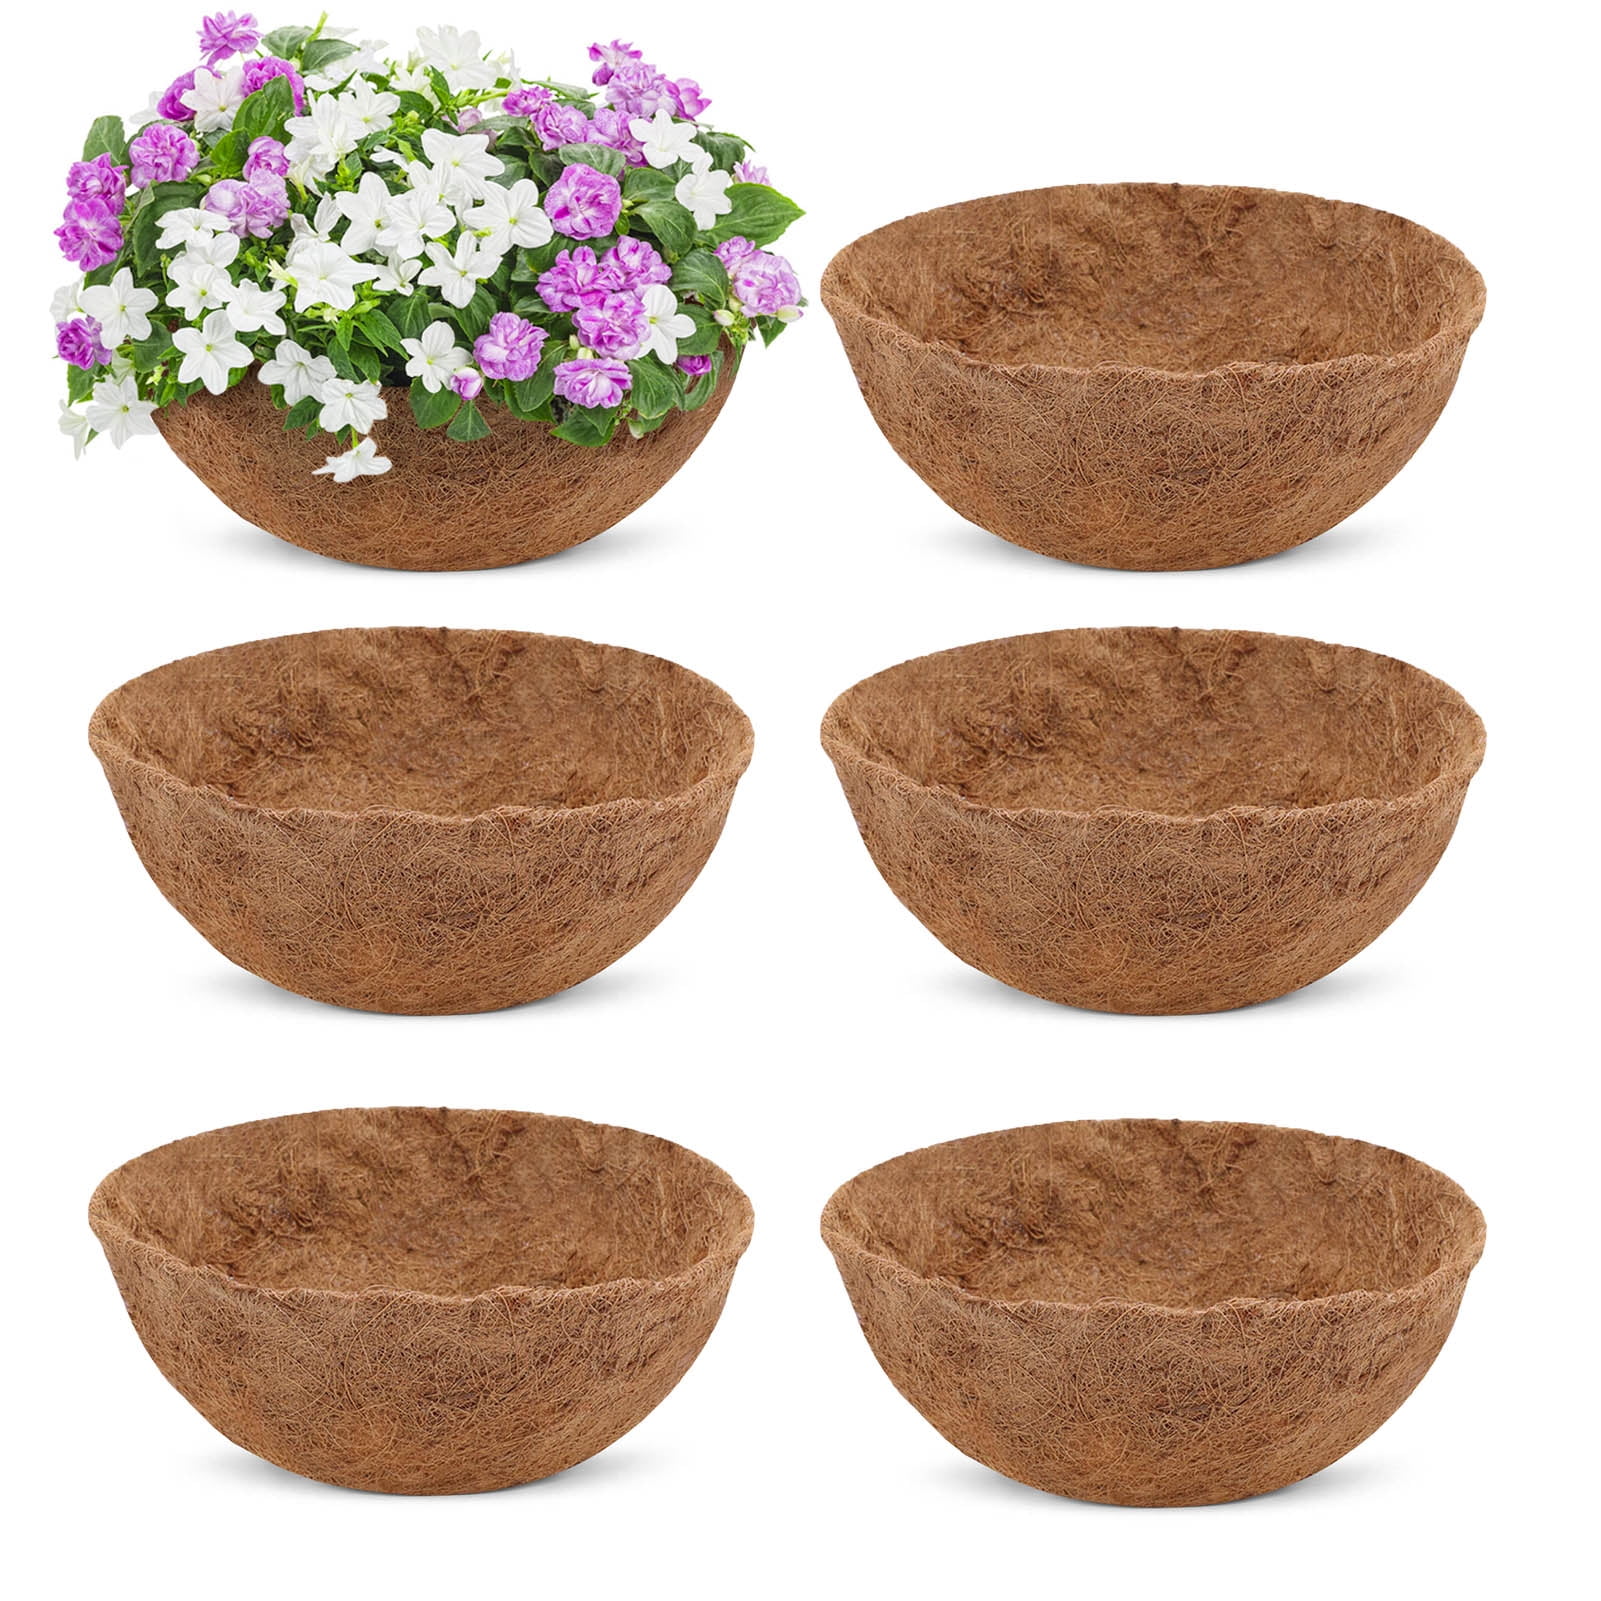 10 inch Hanging Basket Liners 6 Pack - Easy to use Liner Just Cut to Size 